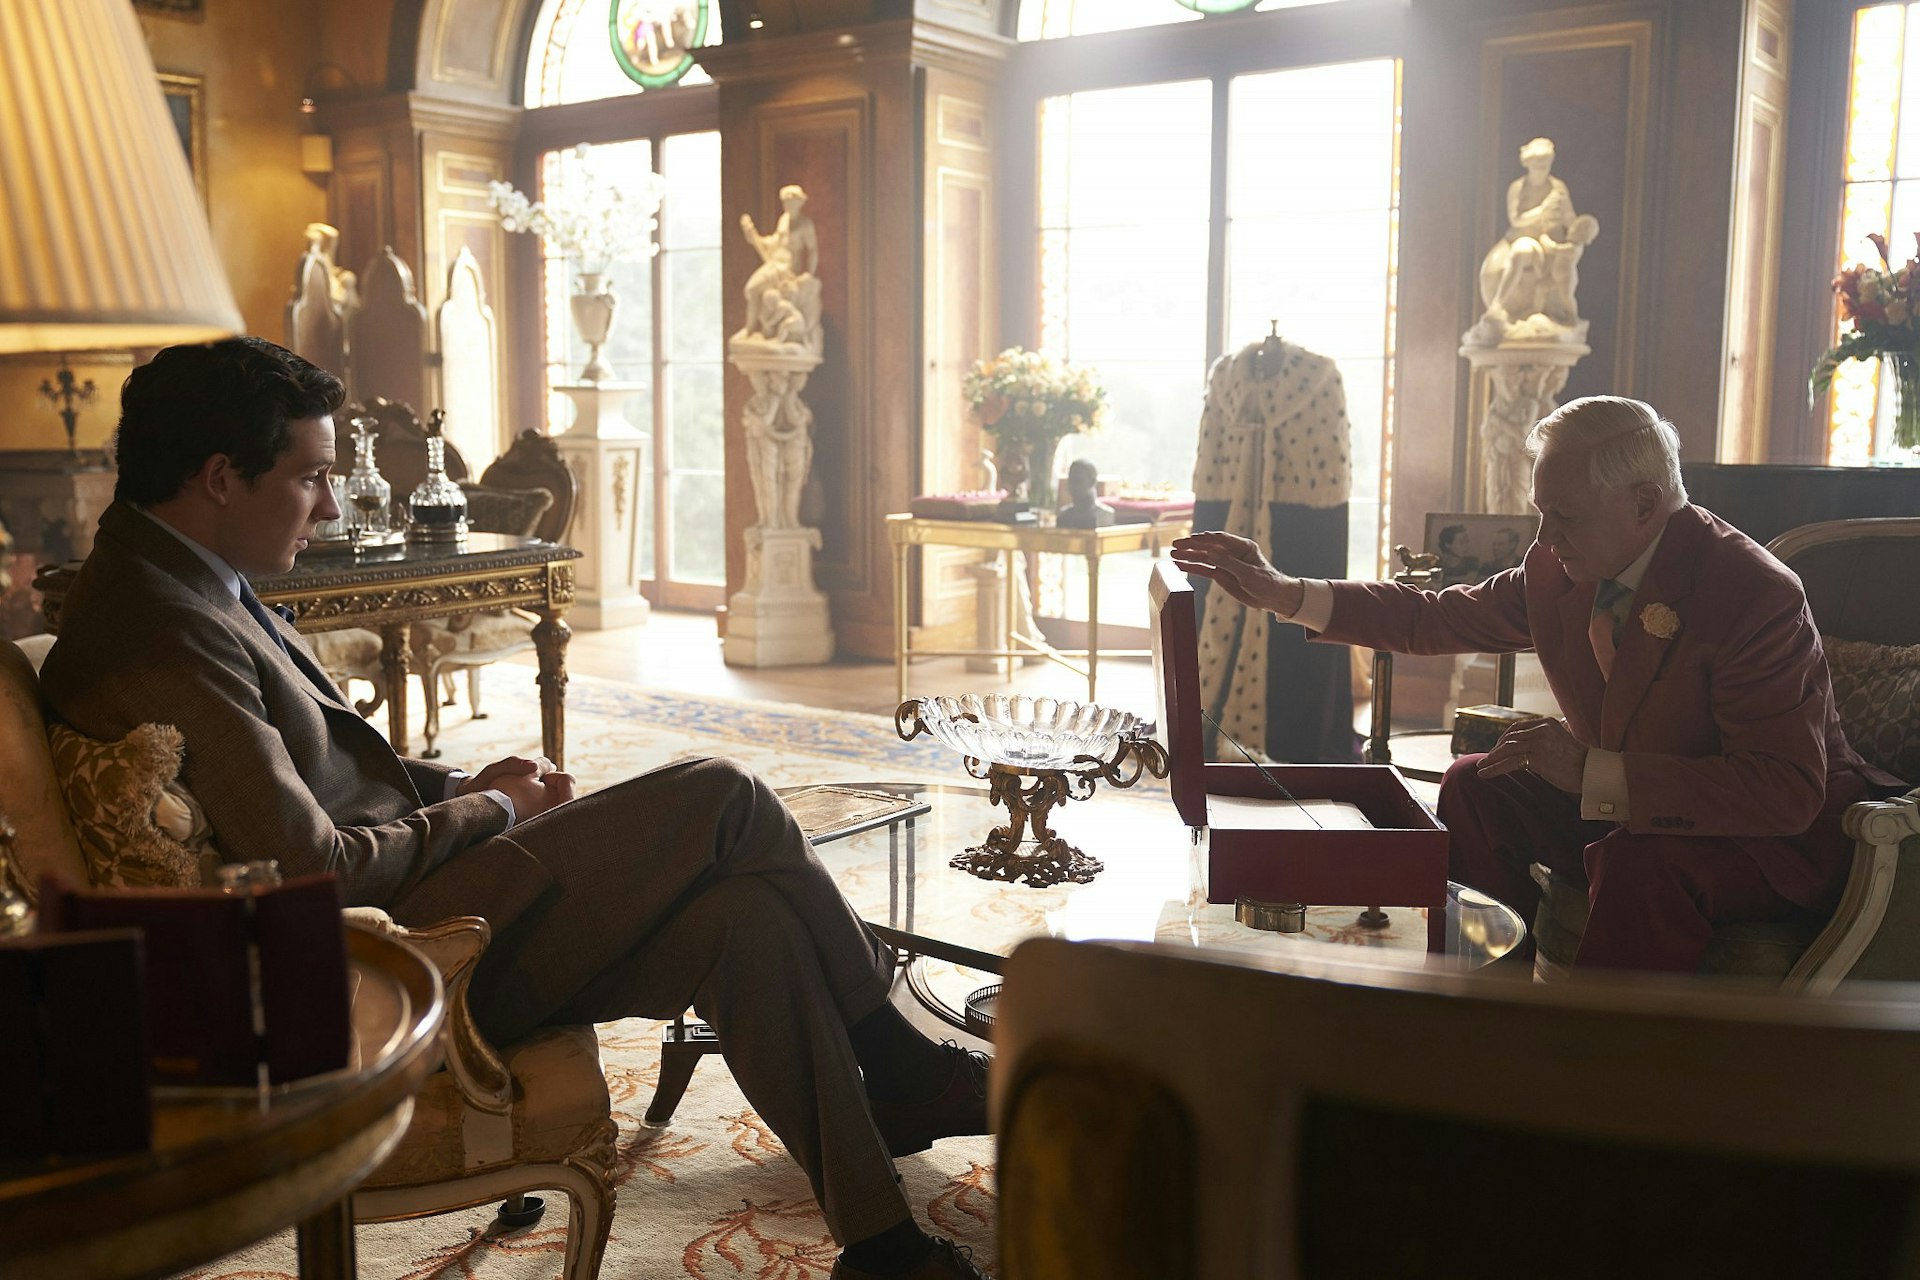 A still from The Crown season 3; it shows West Wycombe House doubling as the Duke of Windsor’s home, with the ailing duke and Prince Charles sat in an elegant drawing room.